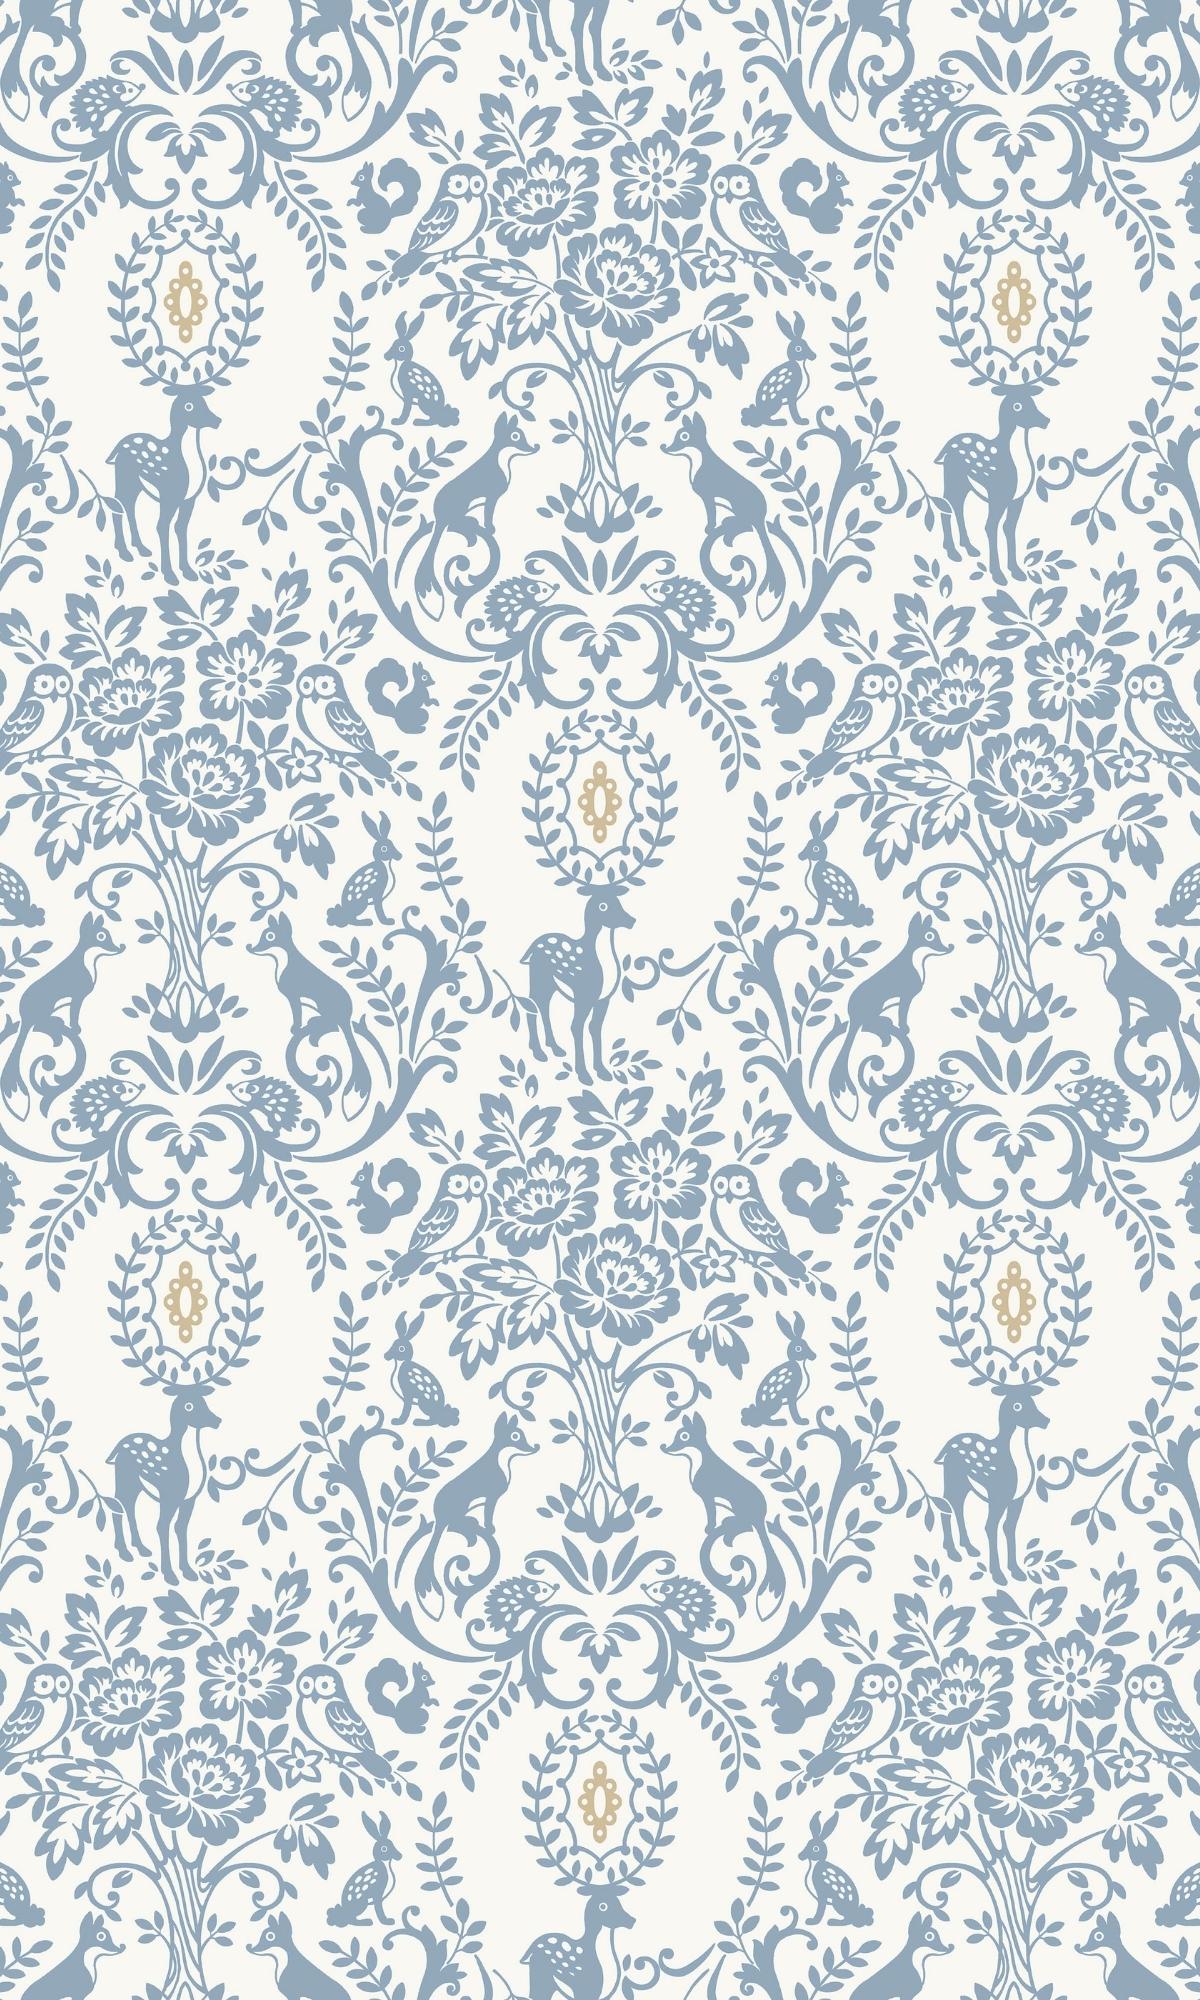 Blue Floral Damask With Animals Kids Wallpaper R7777